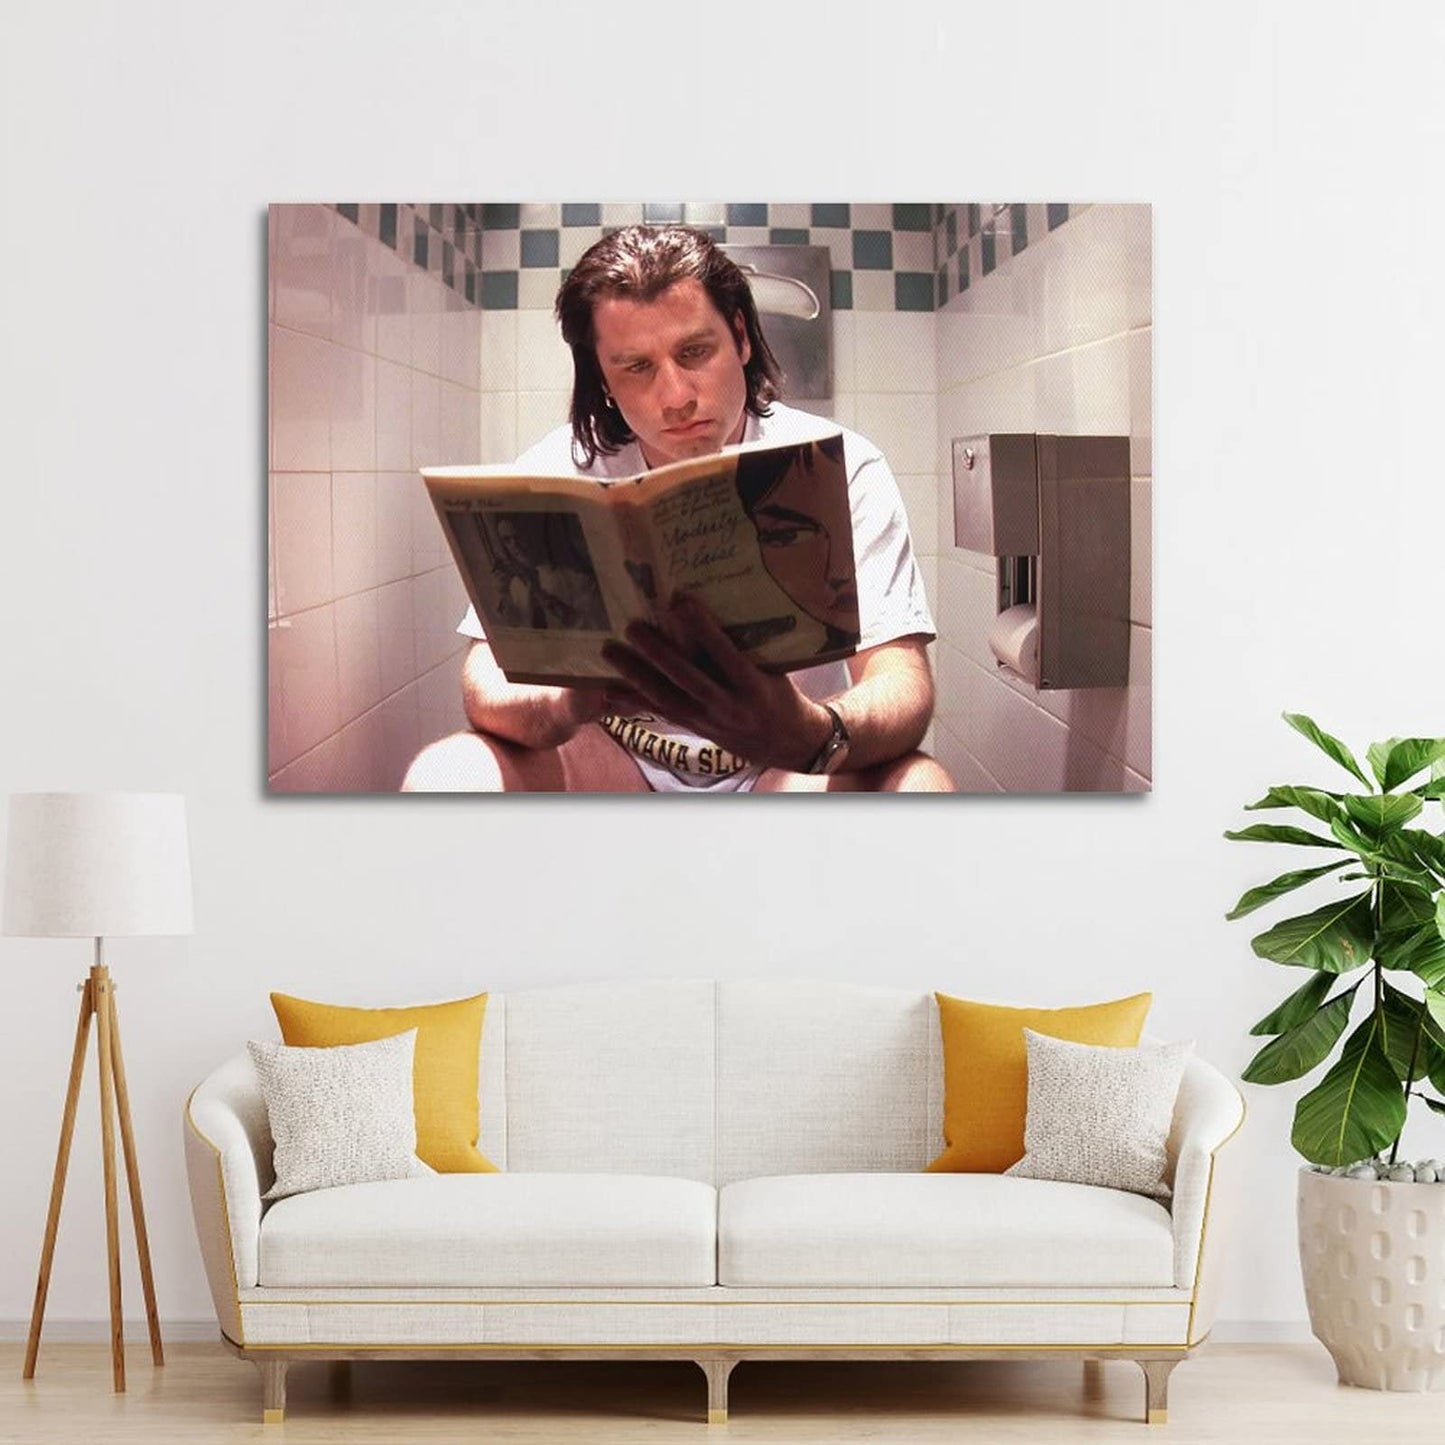 Vincent Vega On Toilet Funny Bathroom Art Posters Cool Wall Decor Art Print Canvas Posters for Room Canvas Art Poster And Wall Art Picture Print Modern Family Bedroom Decor Posters 12x18inch(30x45cm)